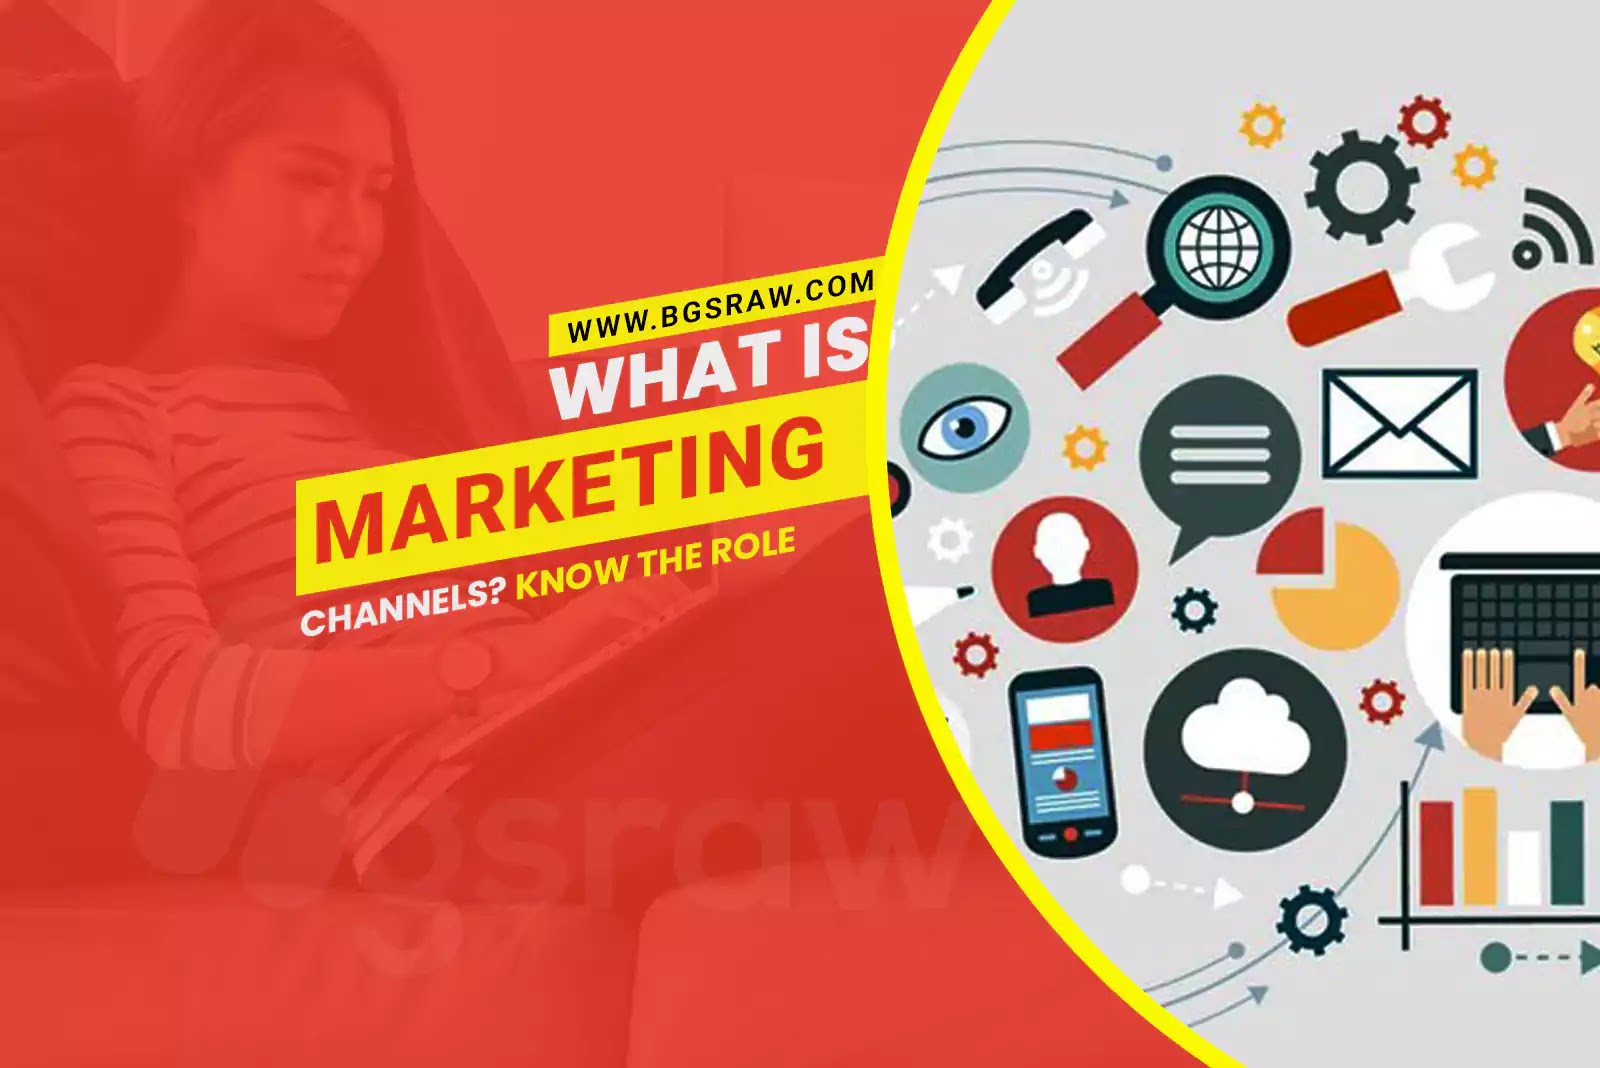 What is marketing channels? Know the role, importance, and types